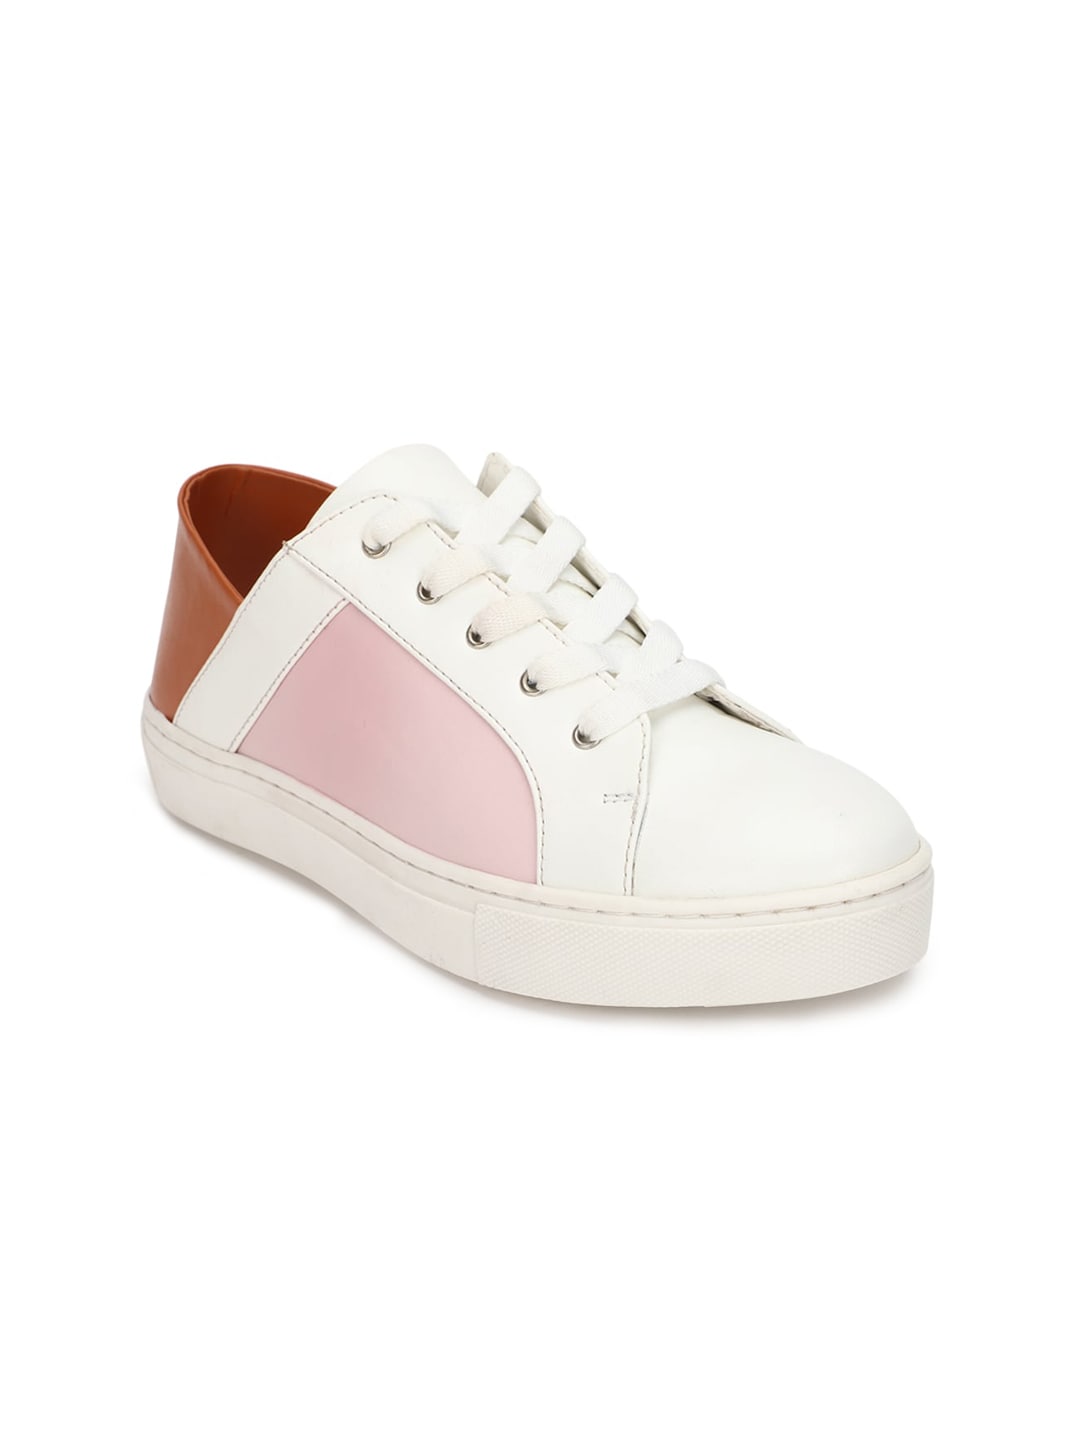 FOREVER 21 Women Pink Colourblocked PU Sneakers Price in India